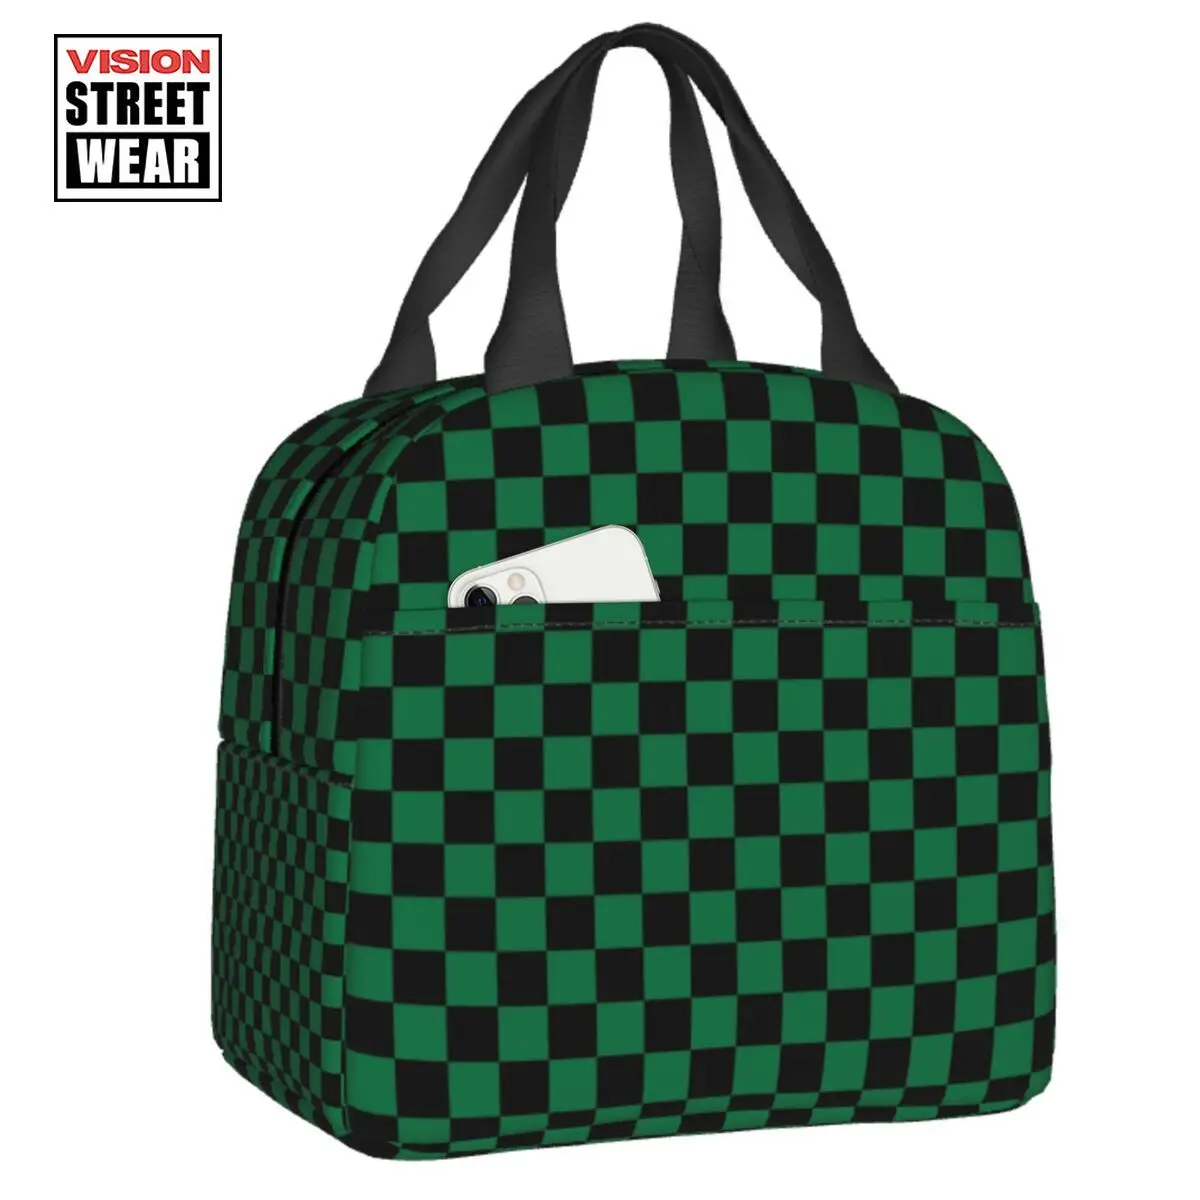 

Black And Cadmium Green Checkerboard Insulated Lunch Bag For Outdoor Picnic Checkered Cooler Thermal Bento Box Children